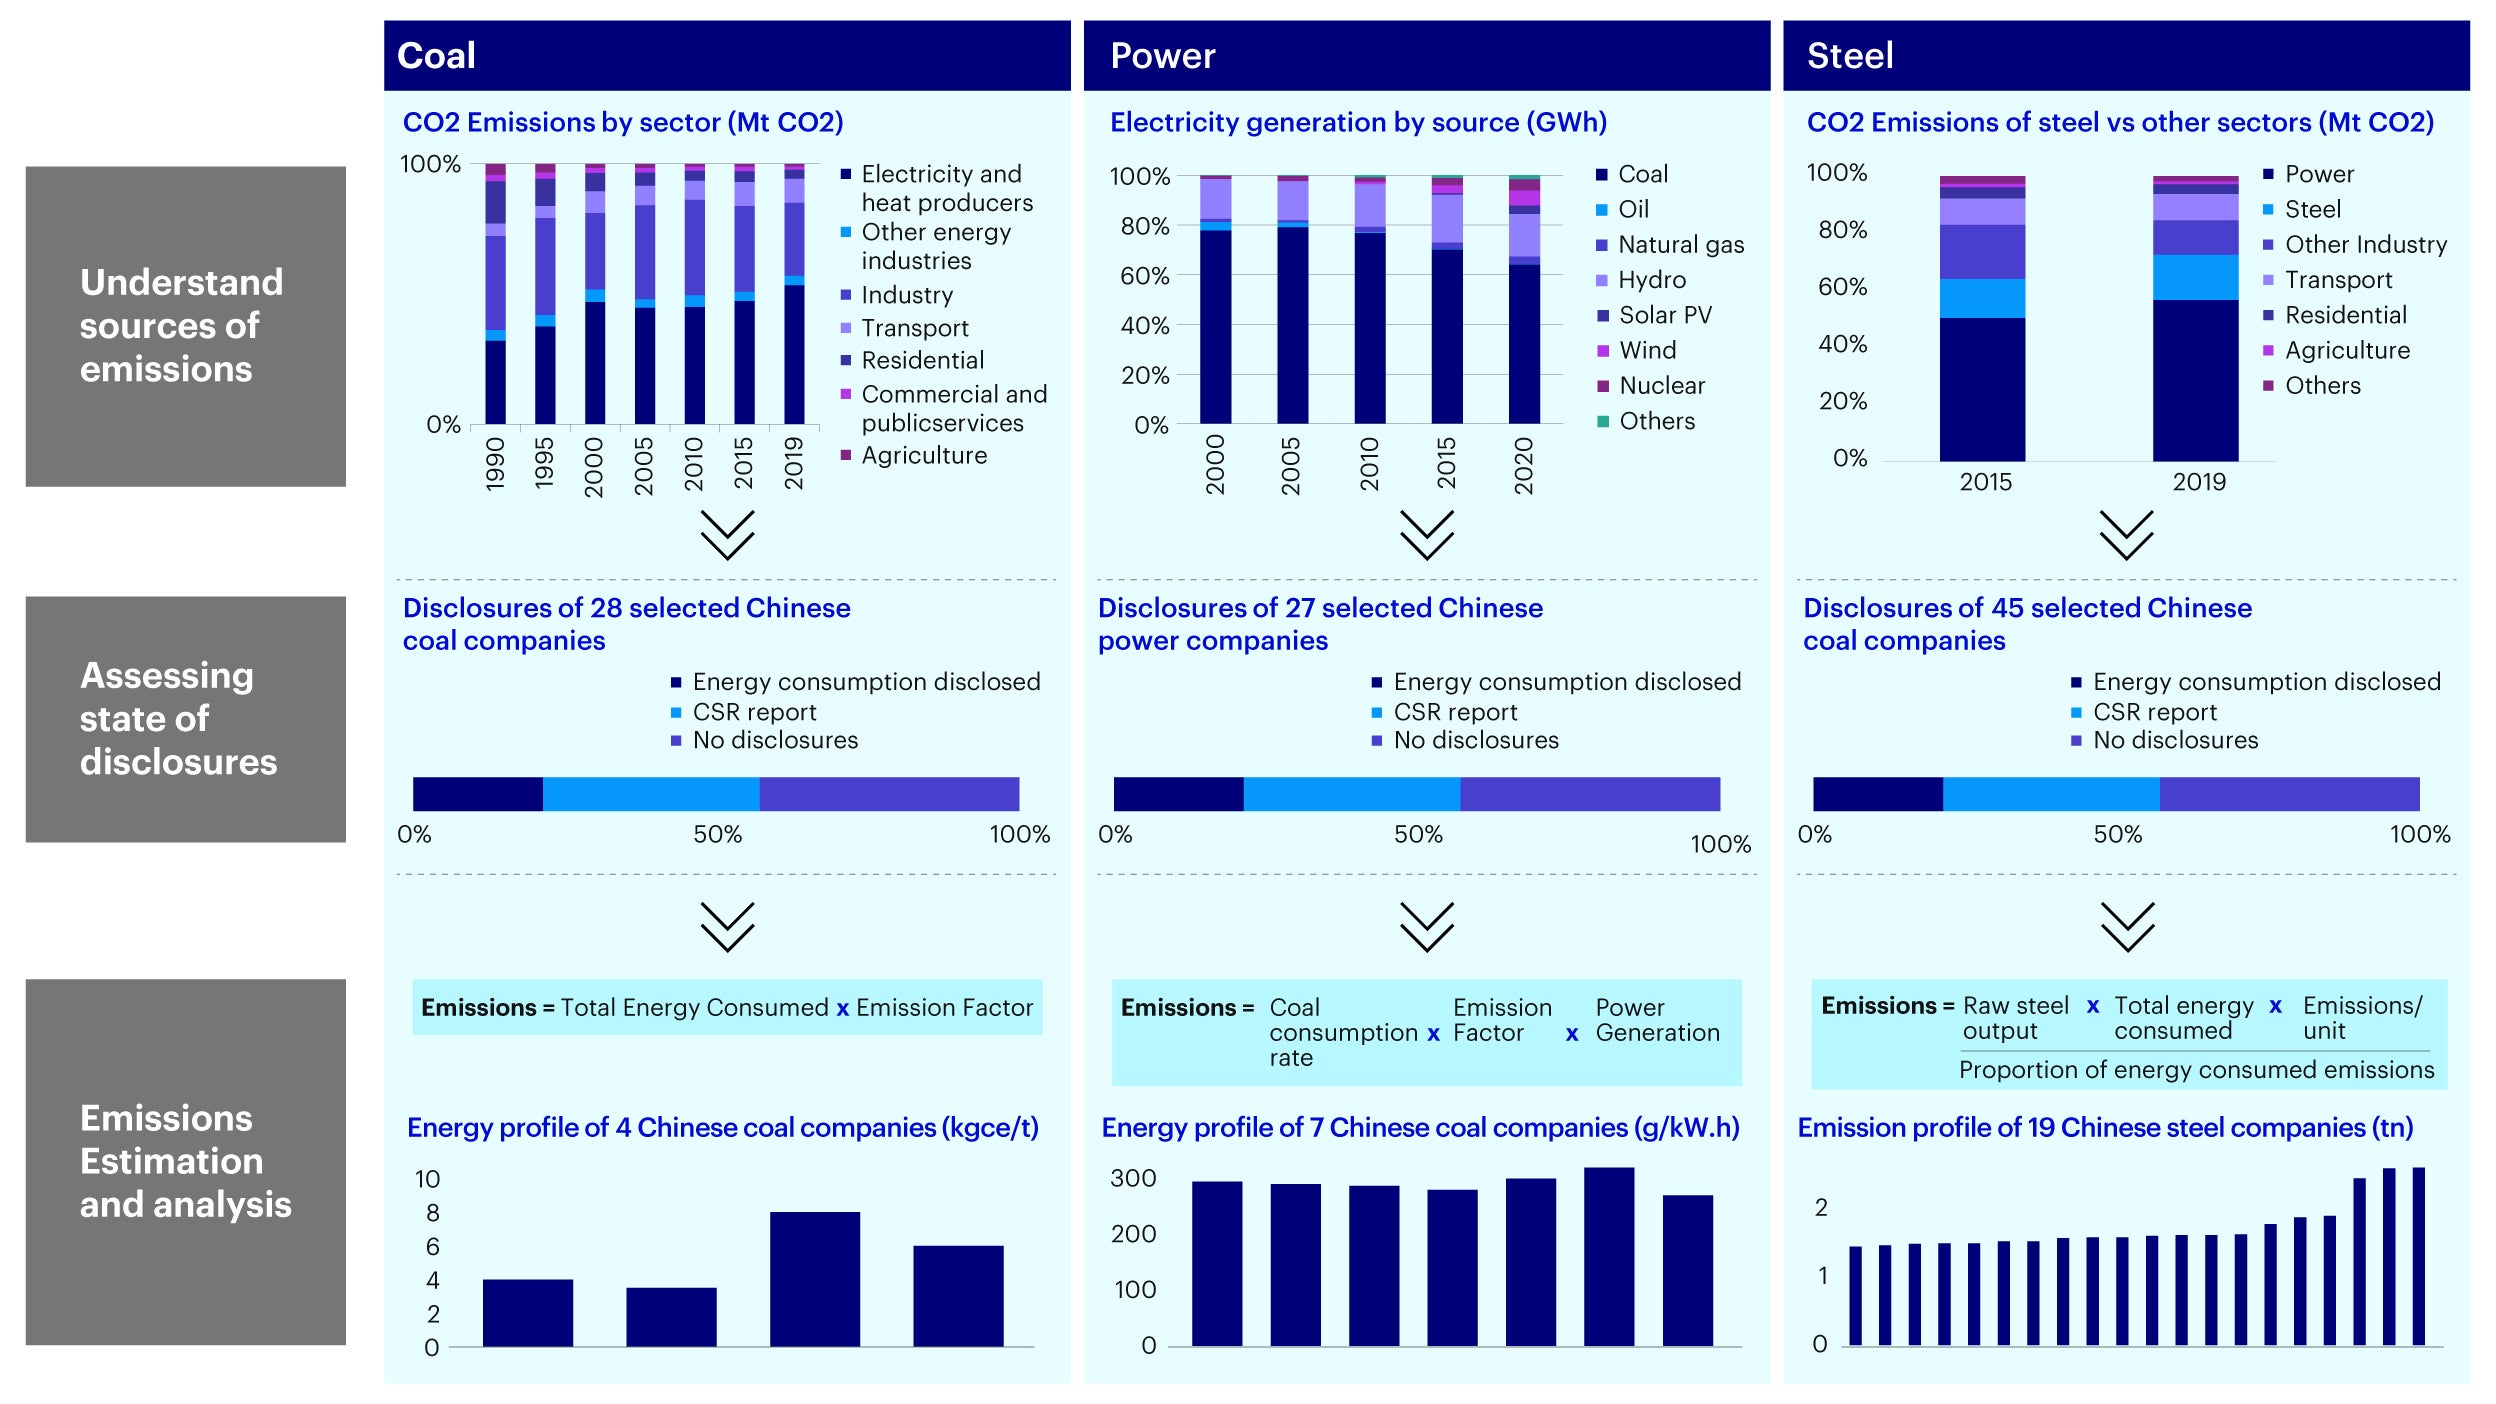 Figure 4 – Emissions analysis: Analyzing existing emissions profile by sector